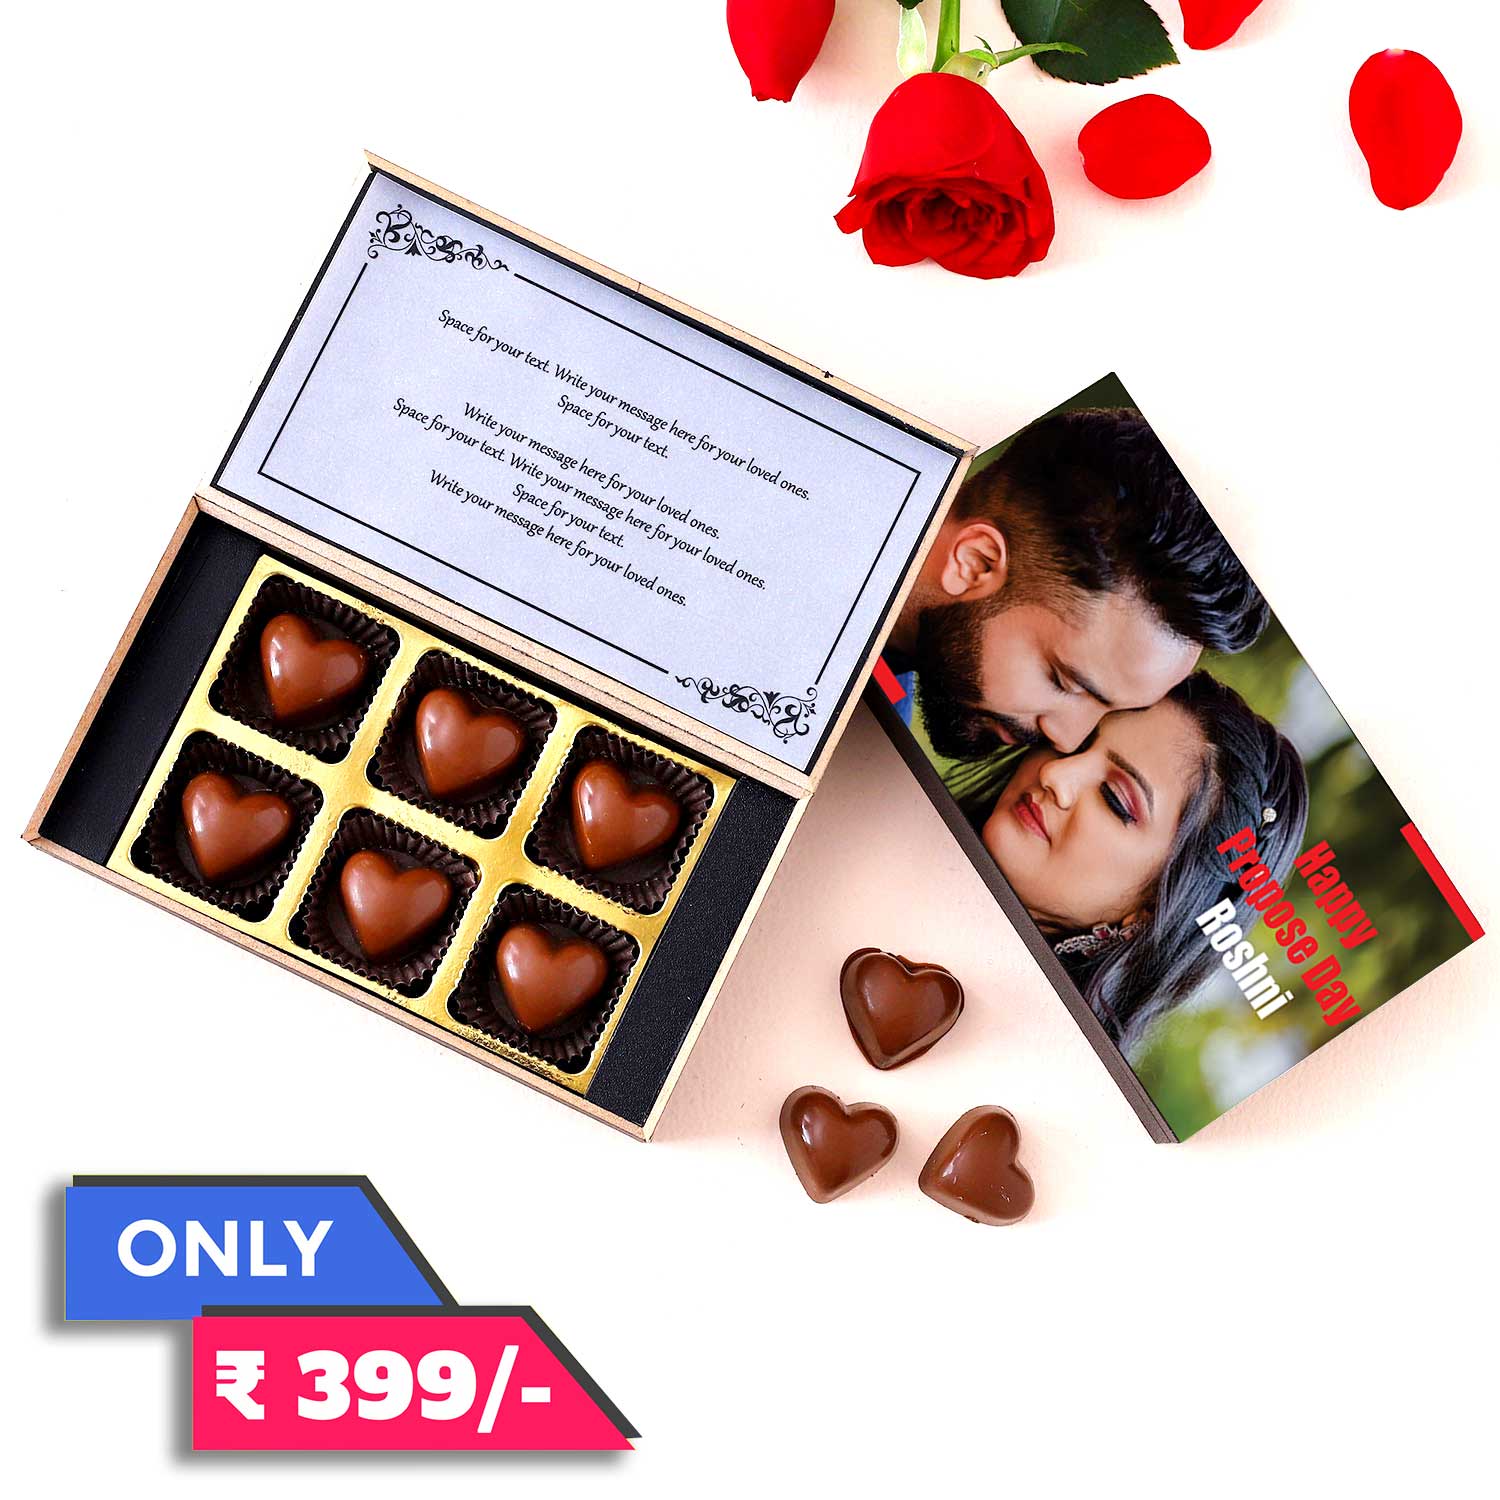 Personalized Propose Day chocolate gift with photo/name printed